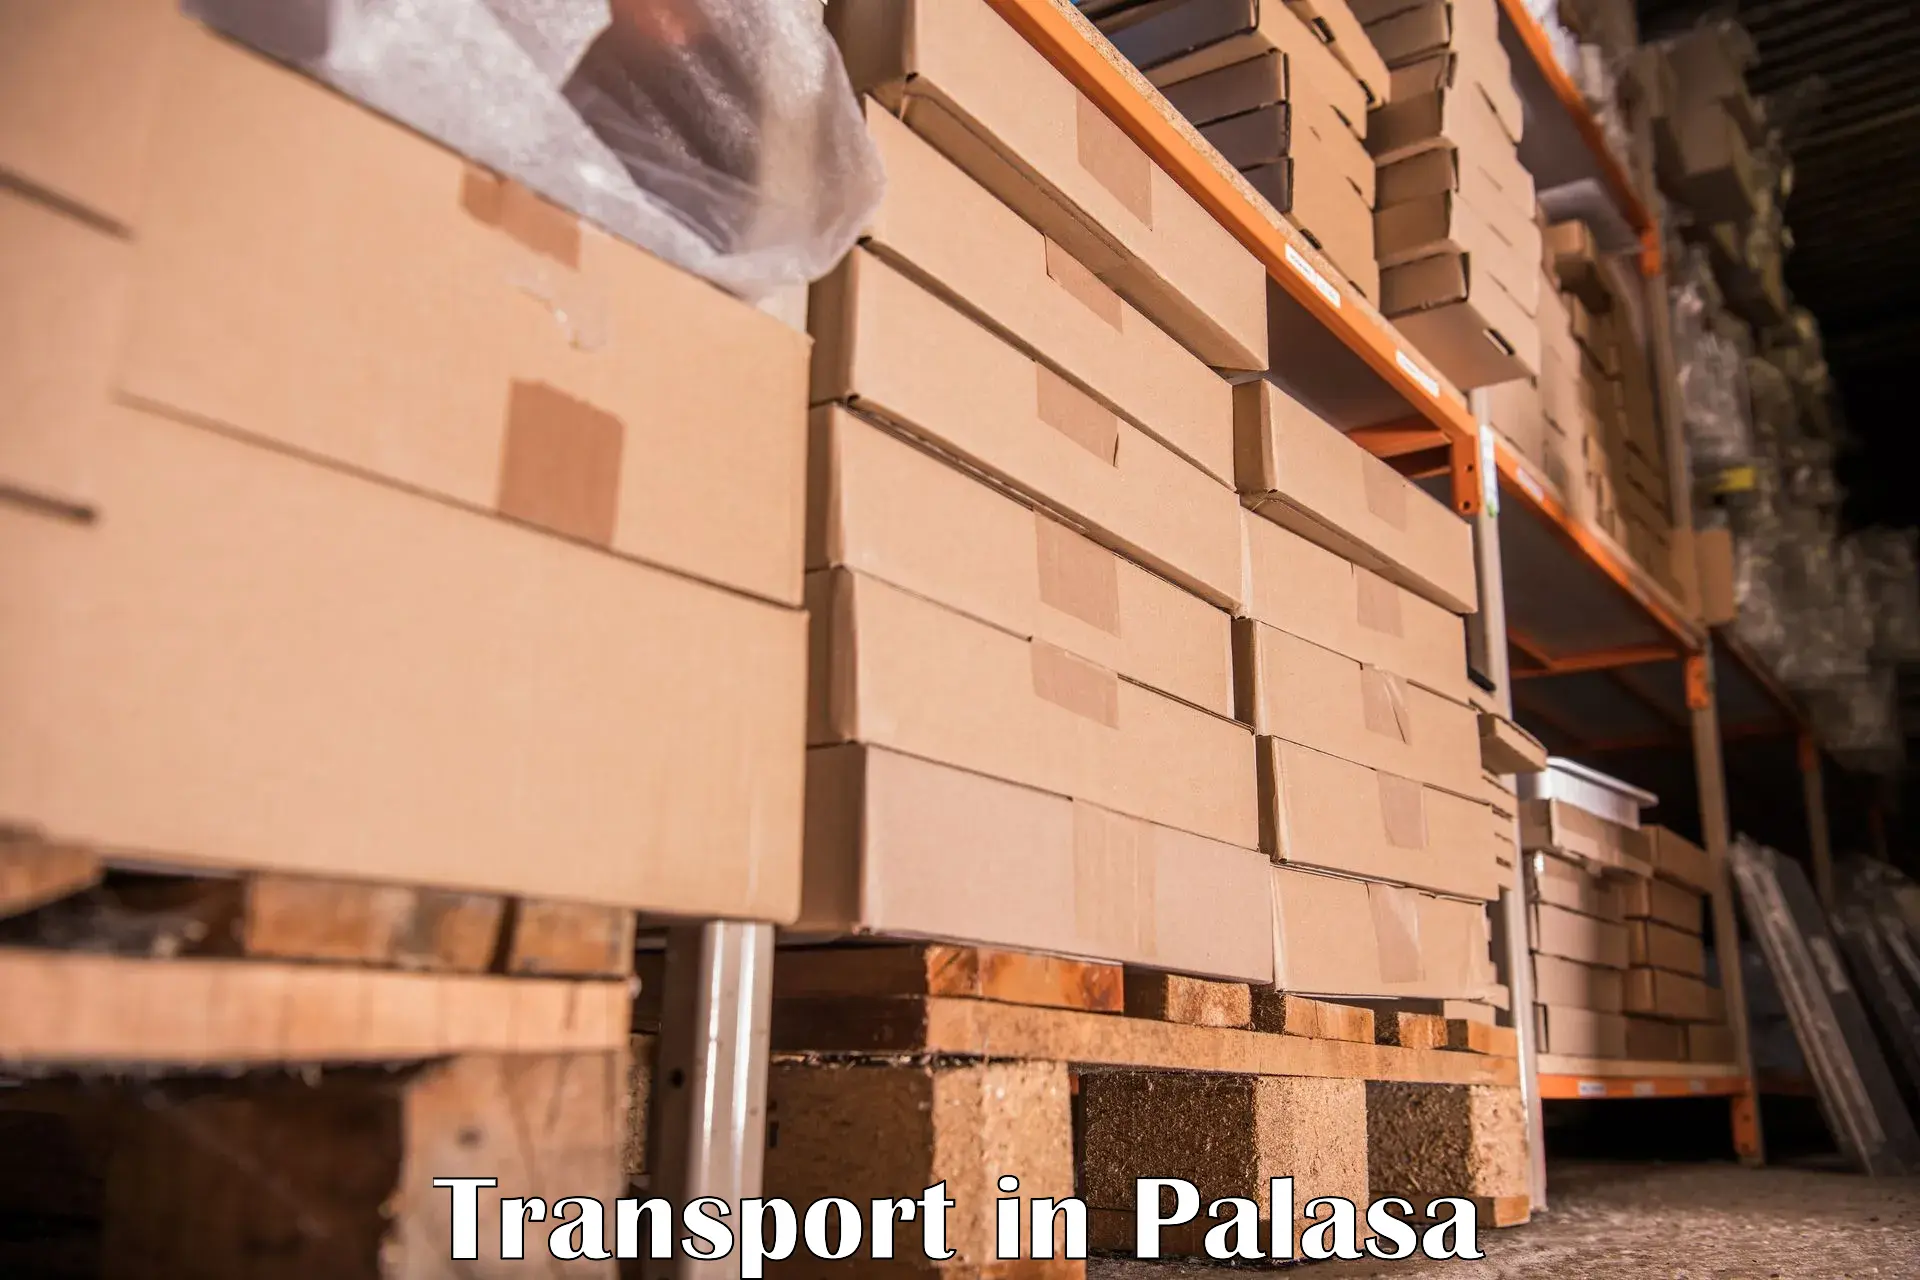 Cargo transport services in Palasa